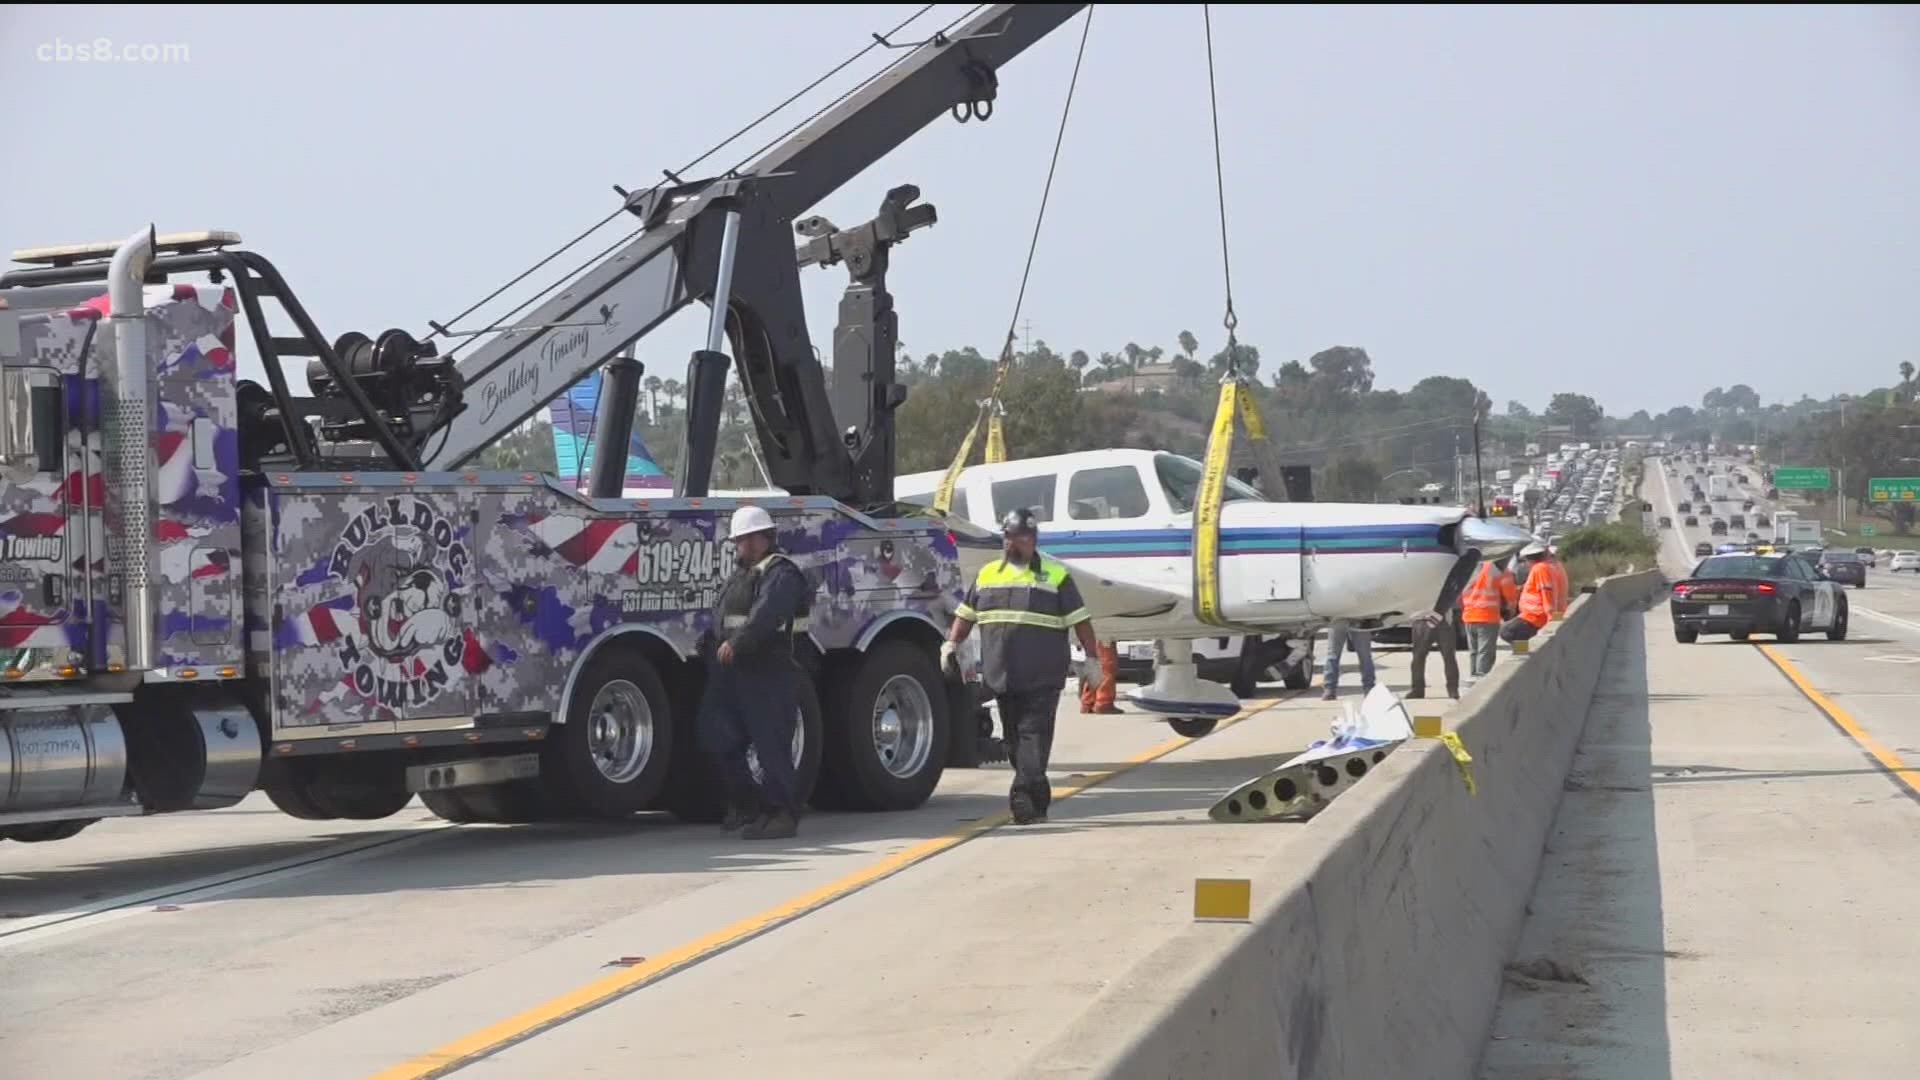 Newly released air traffic control radio calls recount the harrowing moments before the plane landed on the freeway.